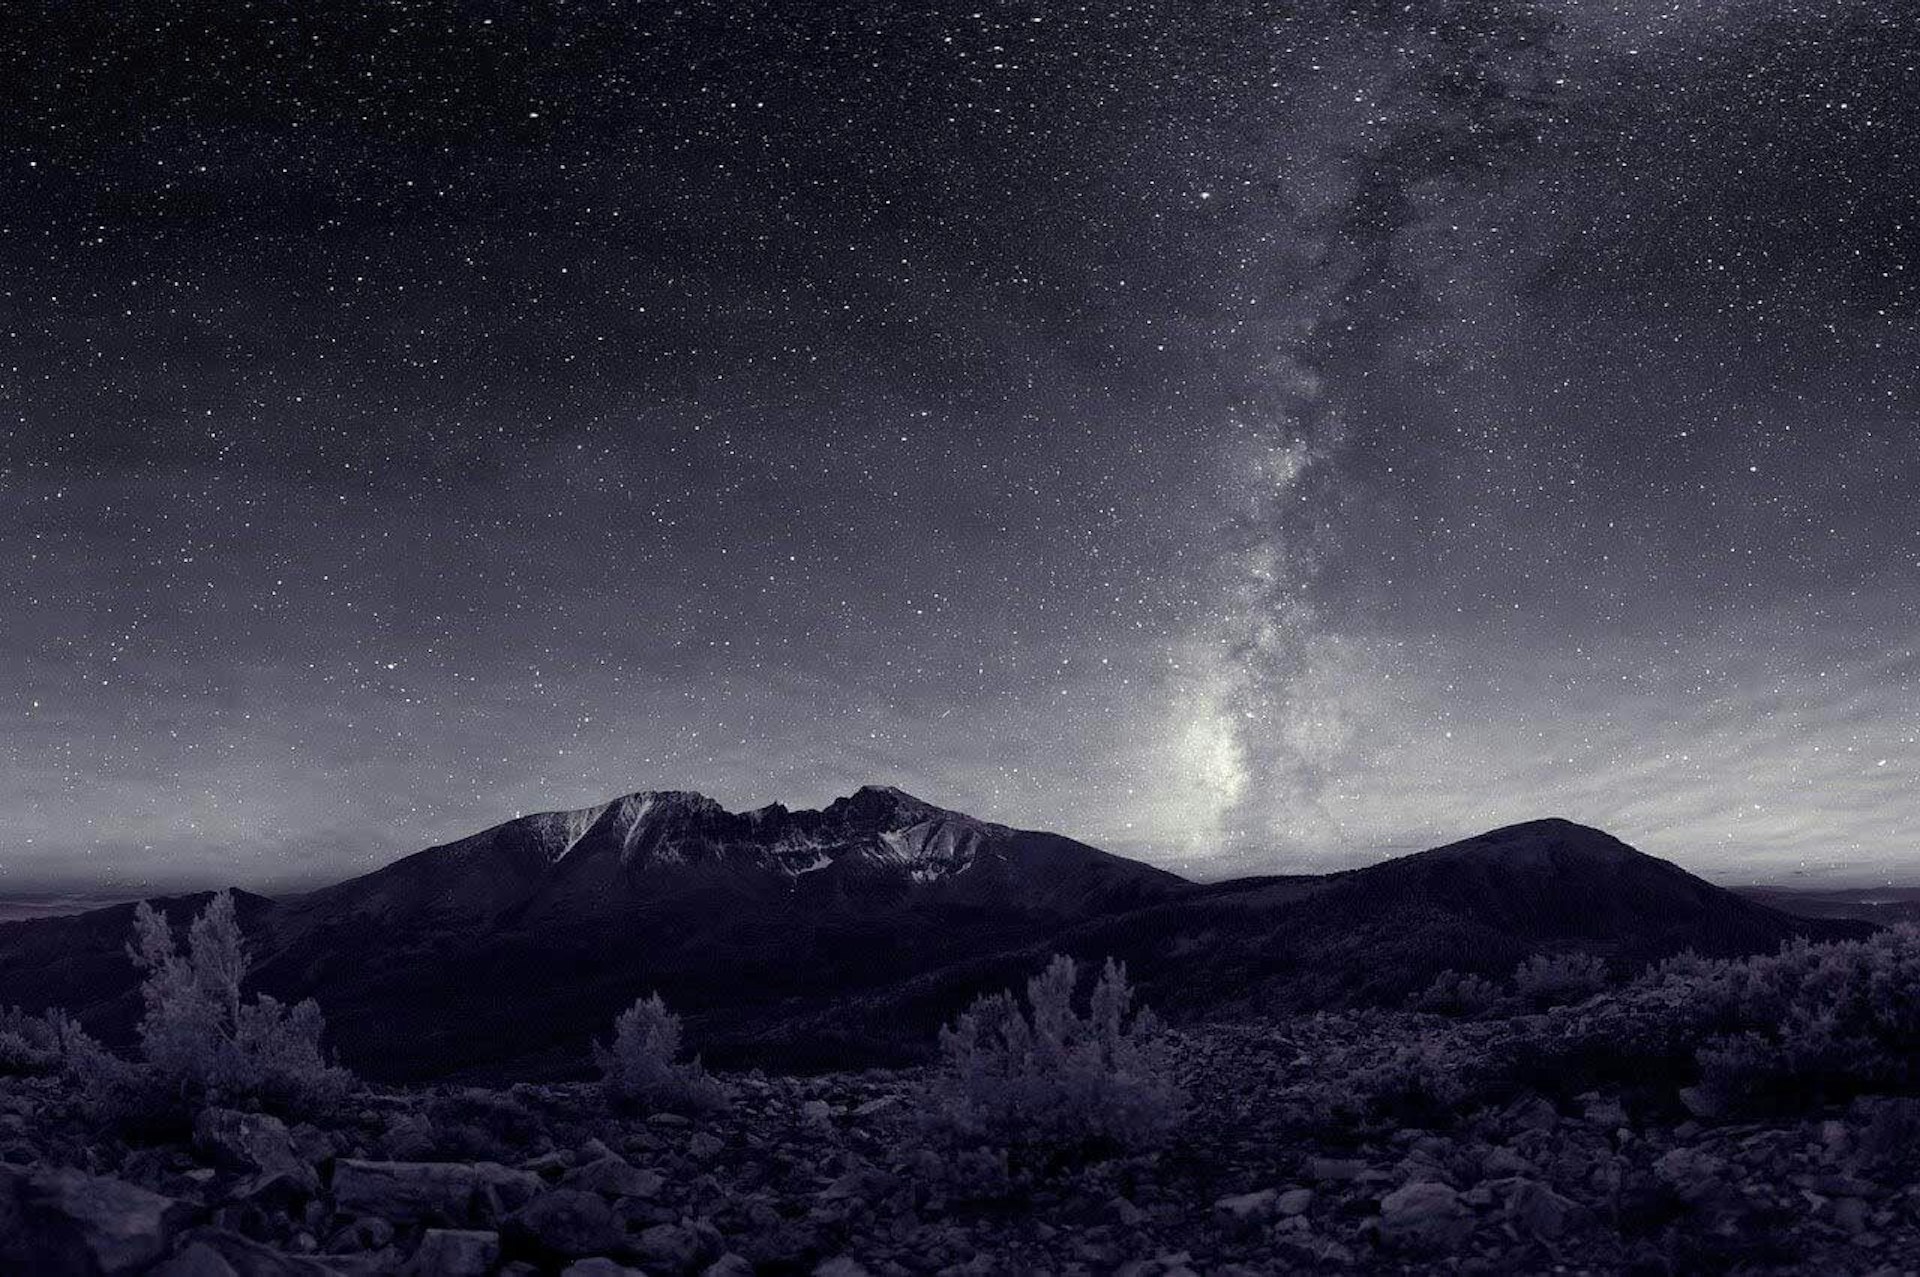 Starry skies at Great Basin National Park